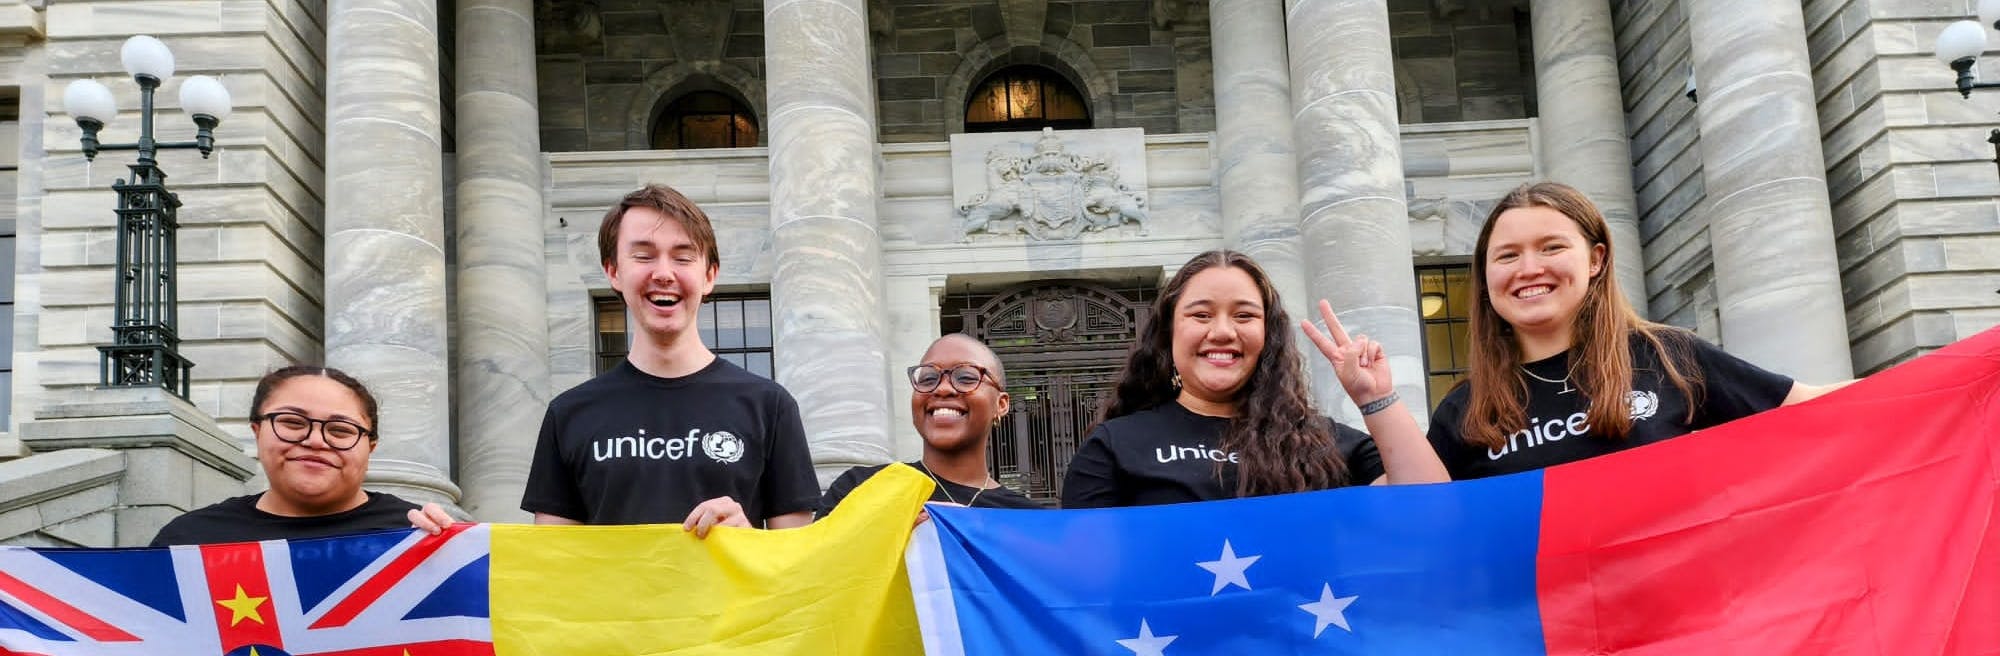 UNICEF Aotearoa Young Ambassadors on the steps of the Beehive